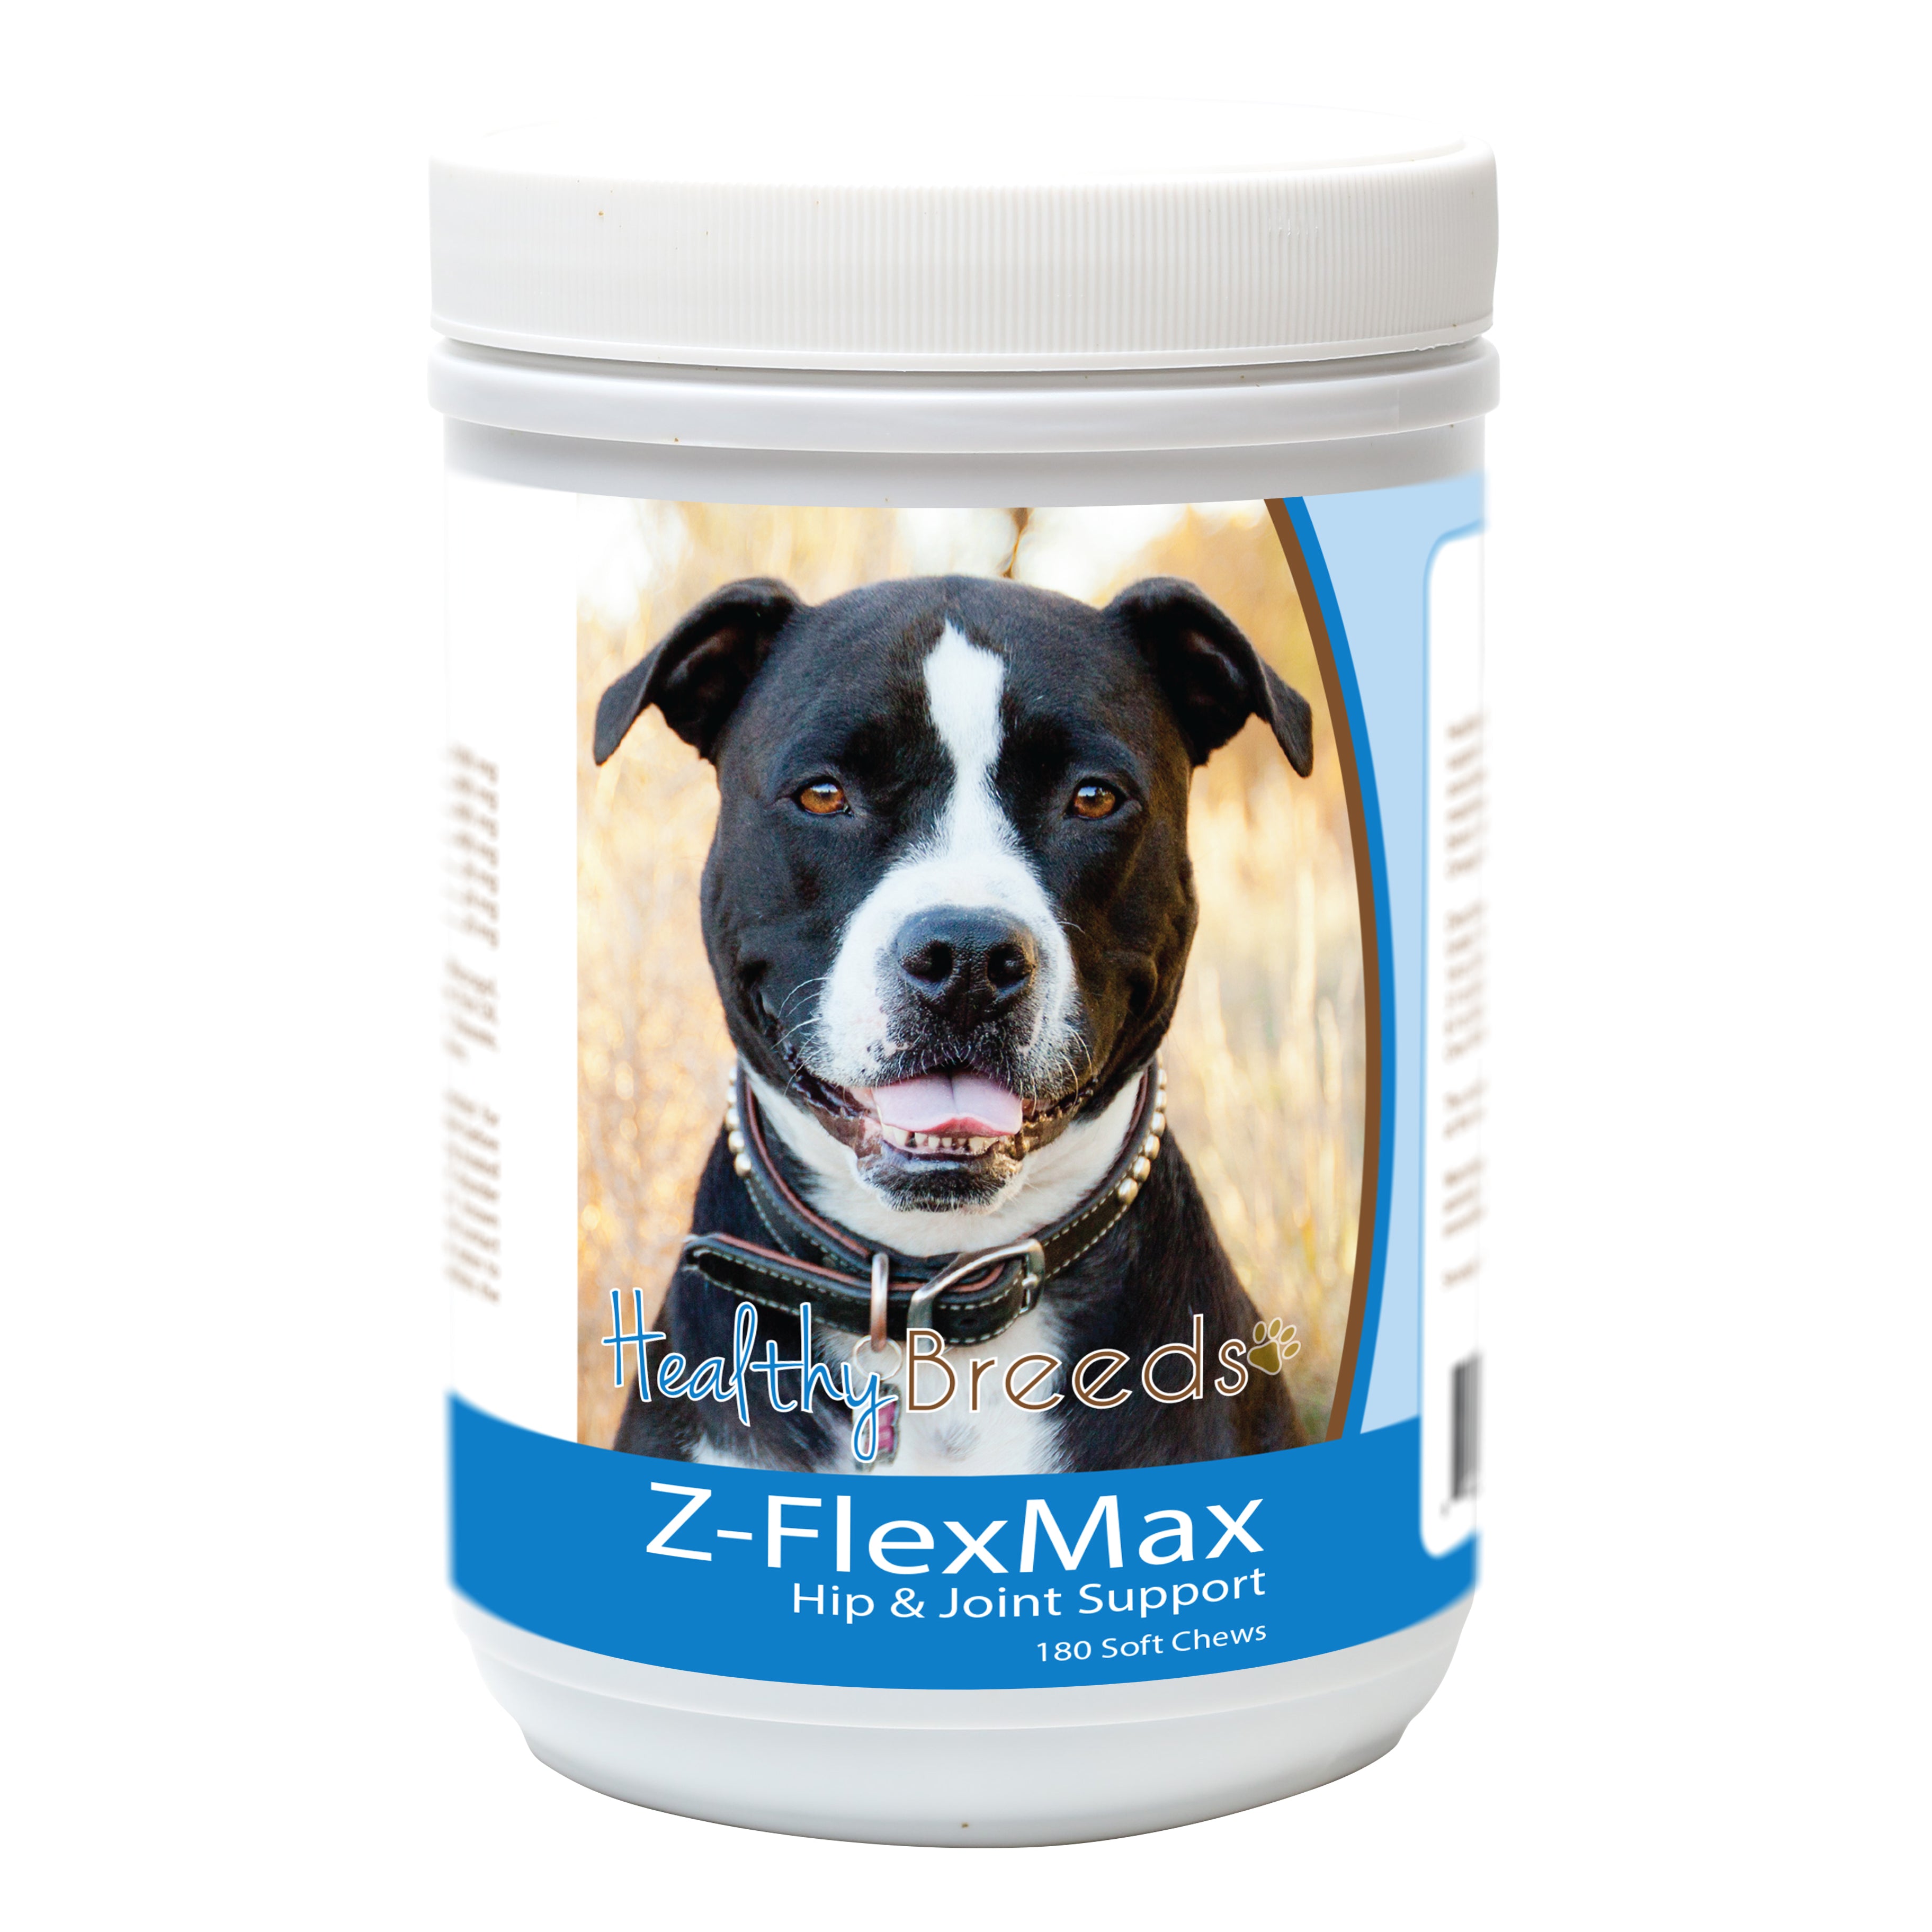 Pit Bull Z-Flex Max Dog Hip and Joint Support 180 Count